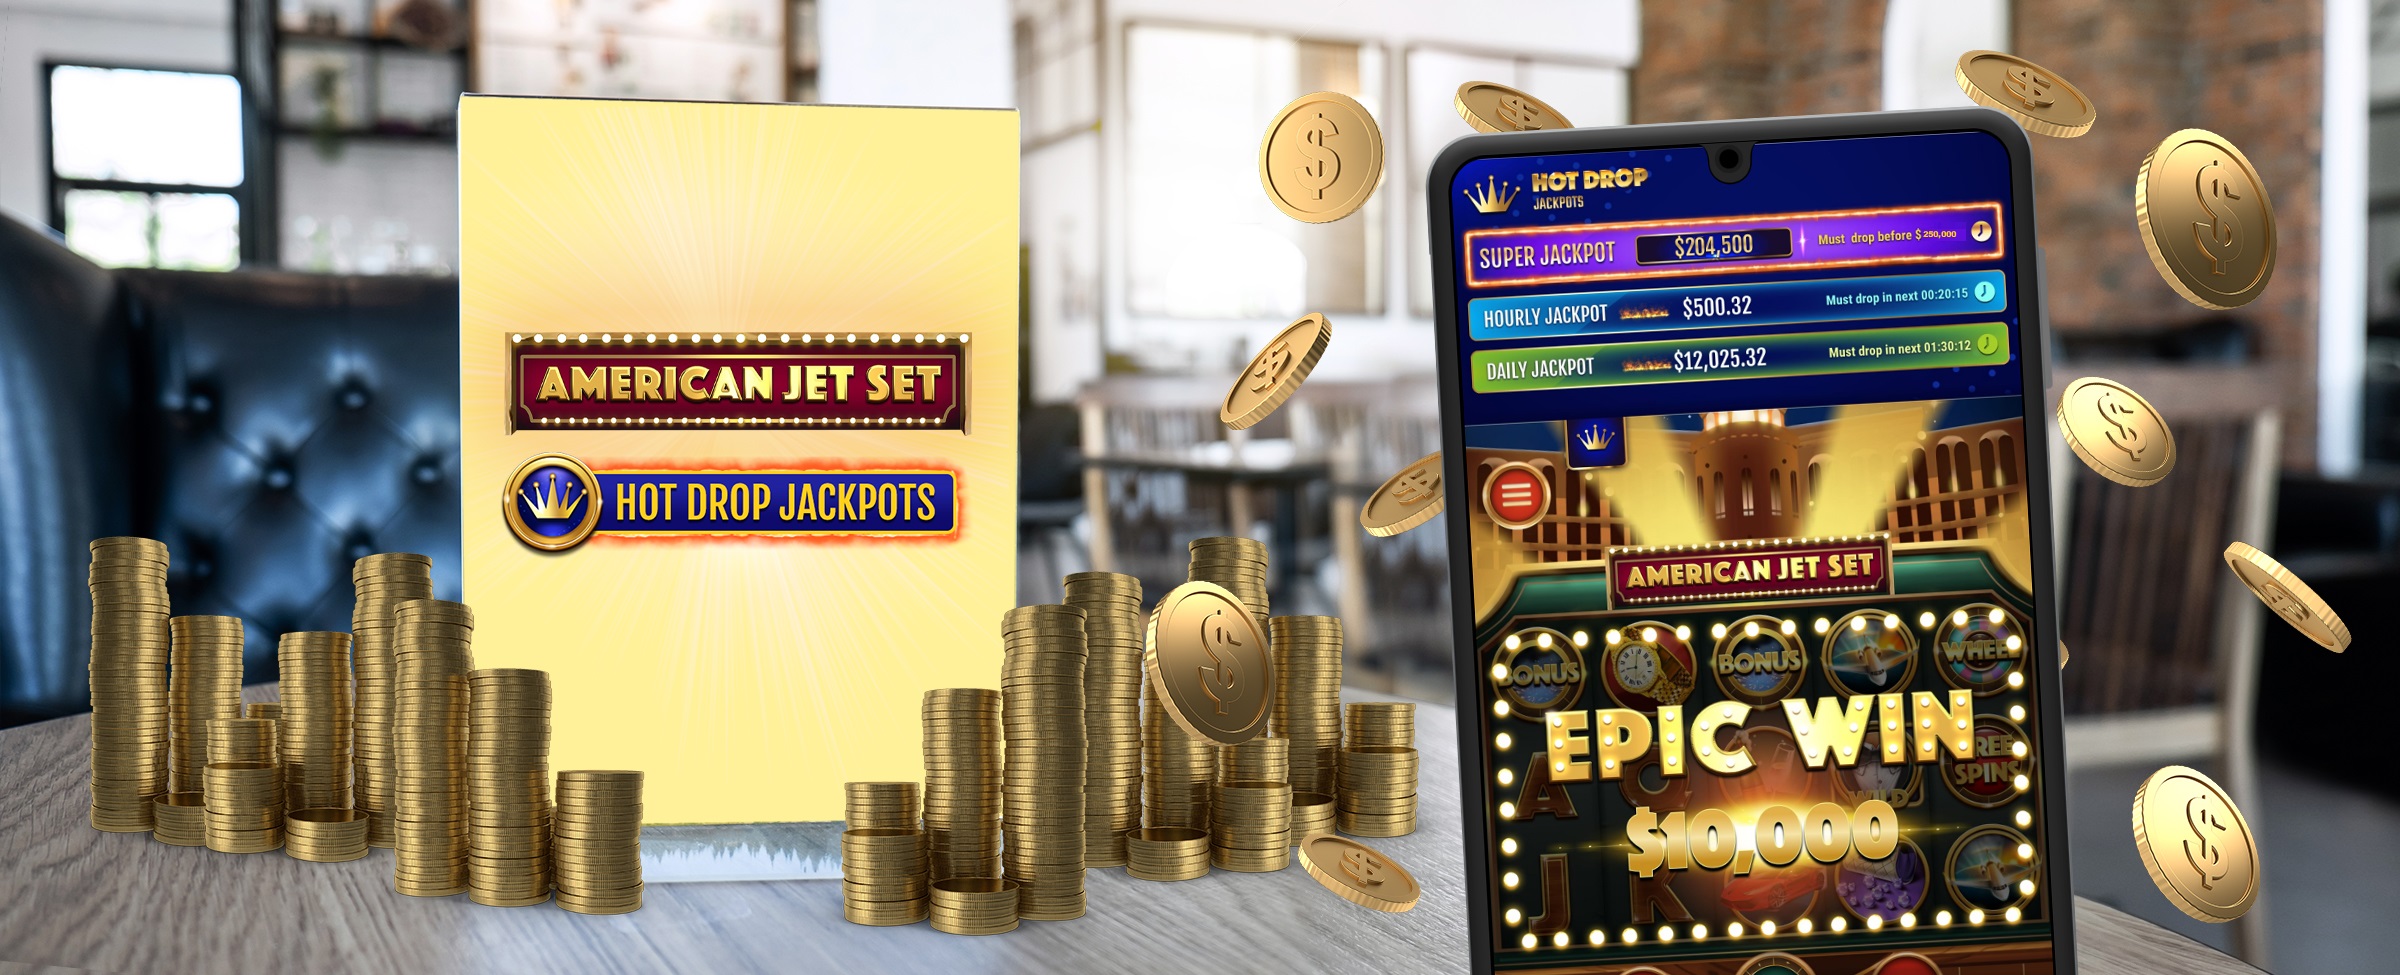 Atop a cafe bench is a stand-up menu that reads “American Jet Set Hot Drop Jackpots” – from a slot game at Cafe Casino, flanked either side by stacks of coins. To the right is a mobile phone, previewing a screen from the same game. In the background is an out-of-focus cafe.